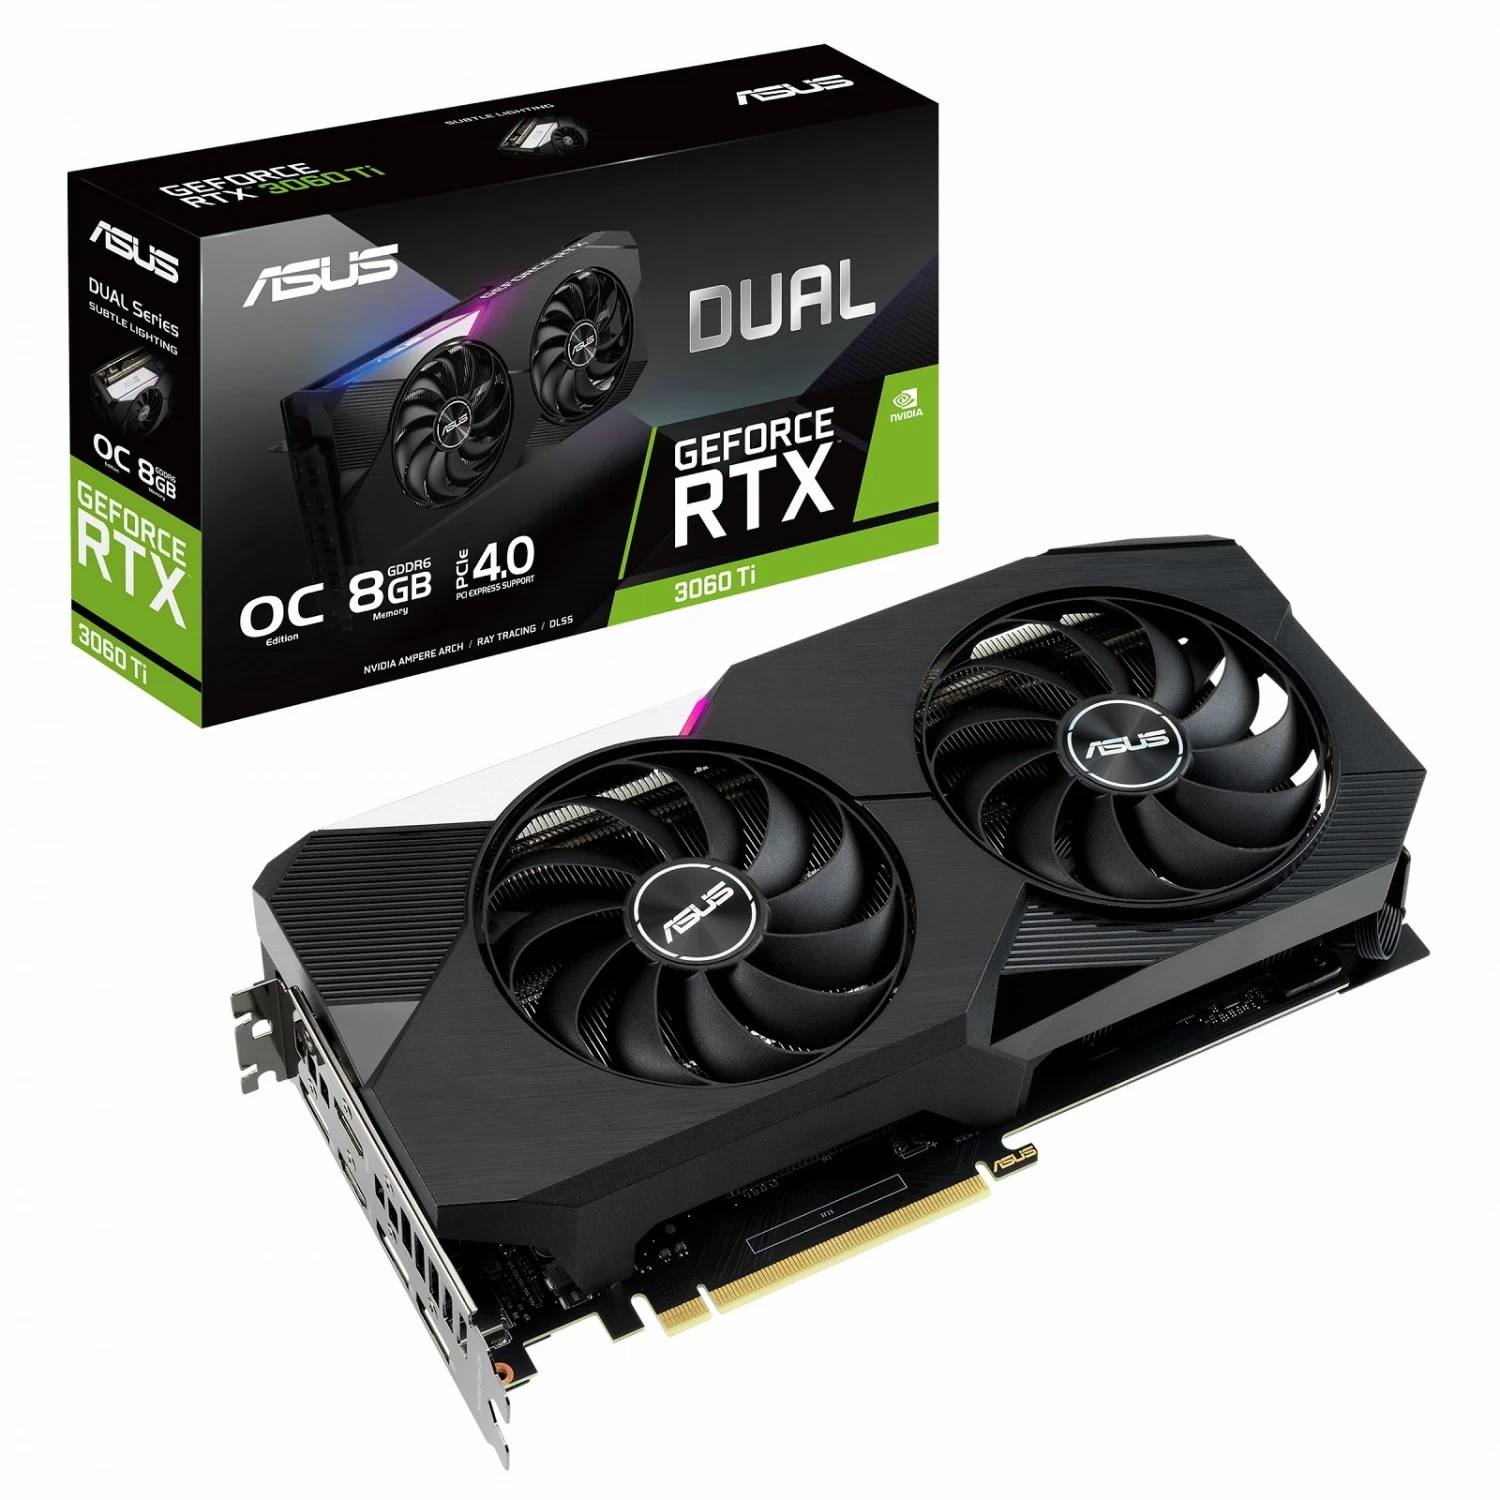 ASUS Dual GeForce RTX 3060 Ti OC Edition 8GB Package